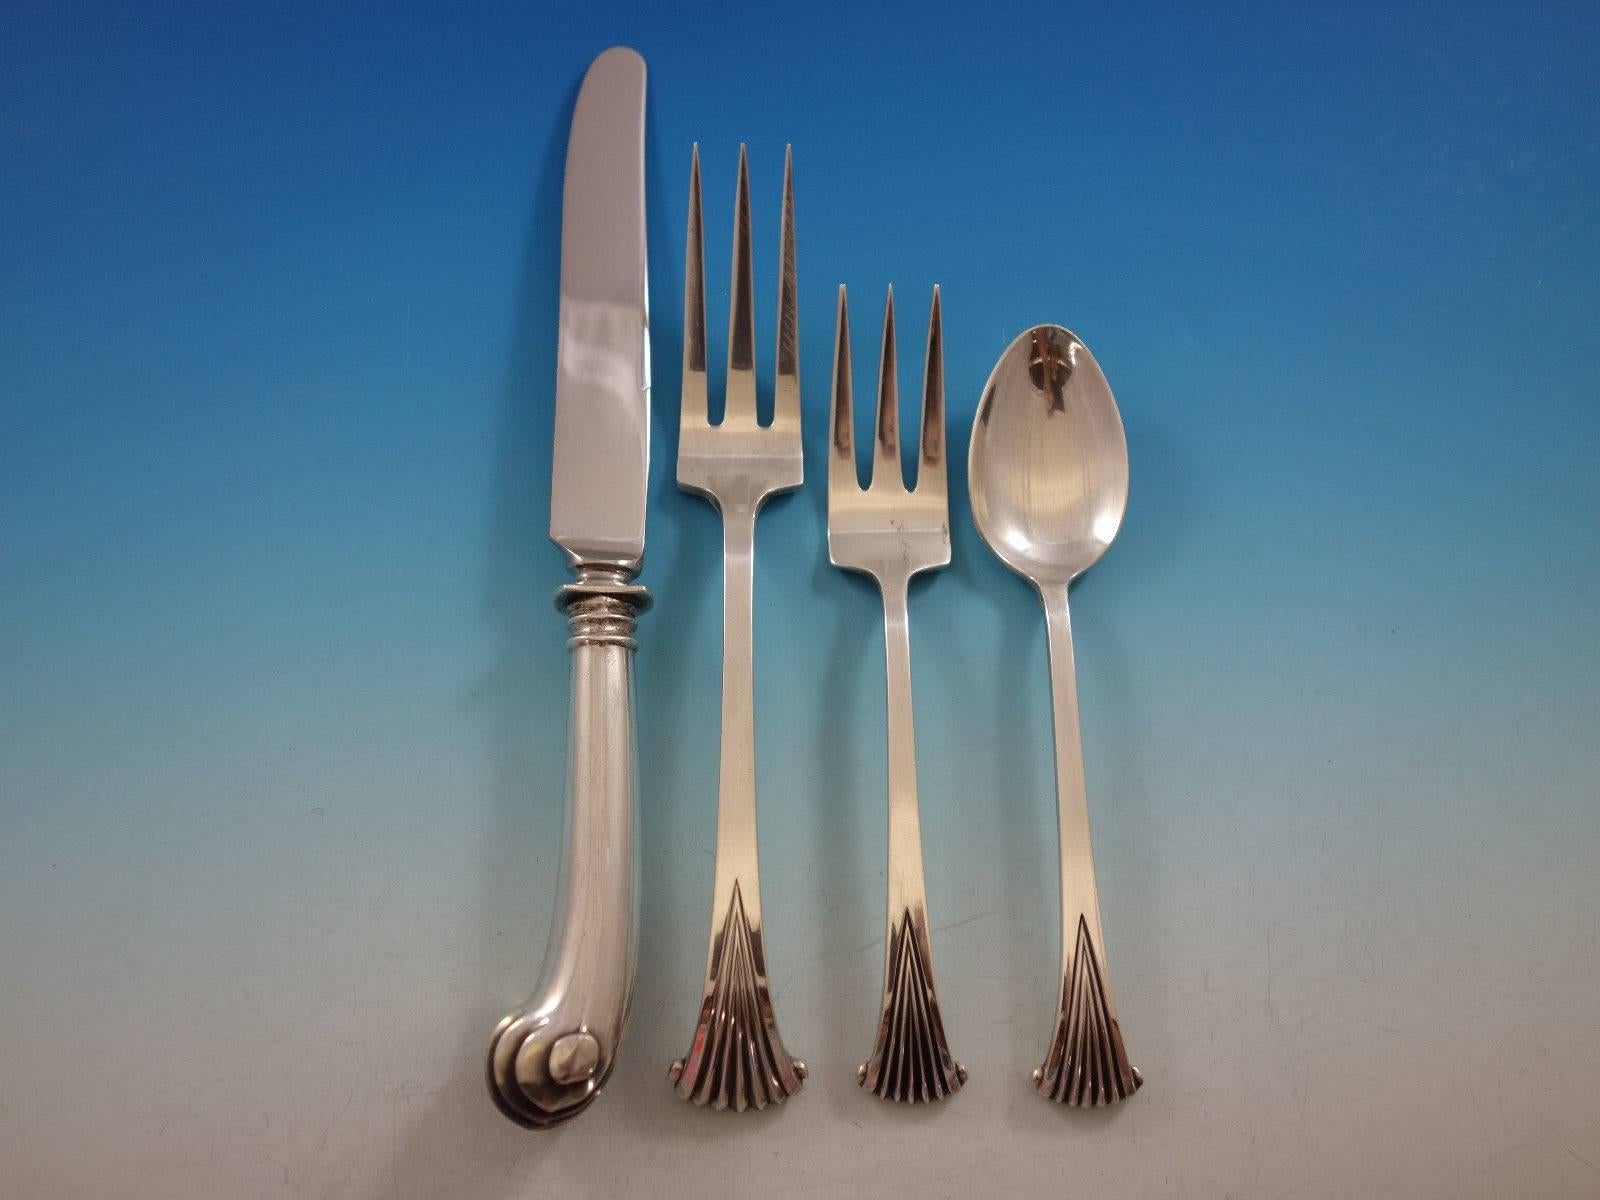 Onslow by Tuttle sterling silver flatware set, 12 pieces. Great starter set! This set includes: 3 knives, pistol grip, 8 3/4